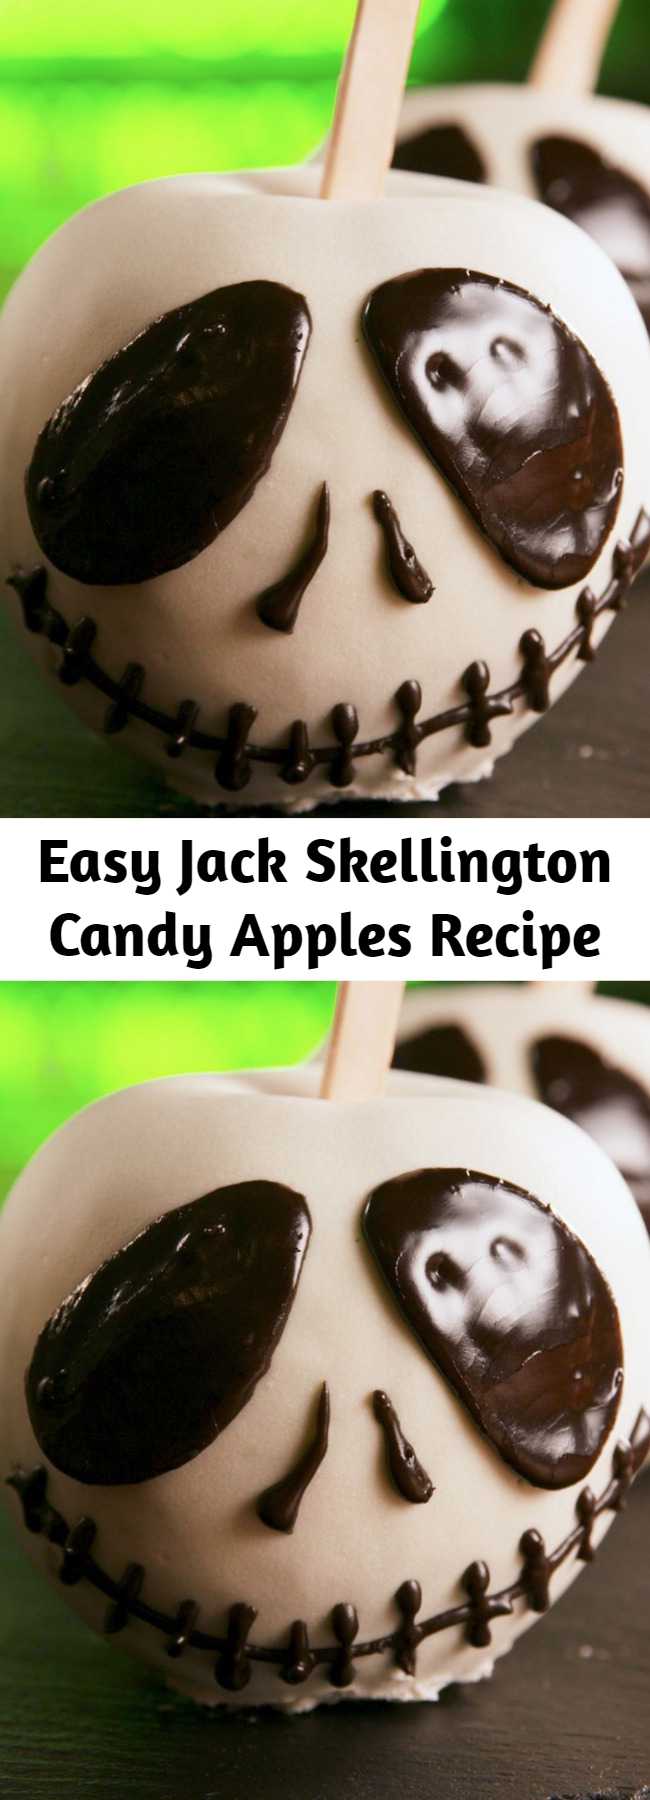 Easy Jack Skellington Candy Apples Recipe - Have a happy Halloween with these Jack Skellington Candy Apples.